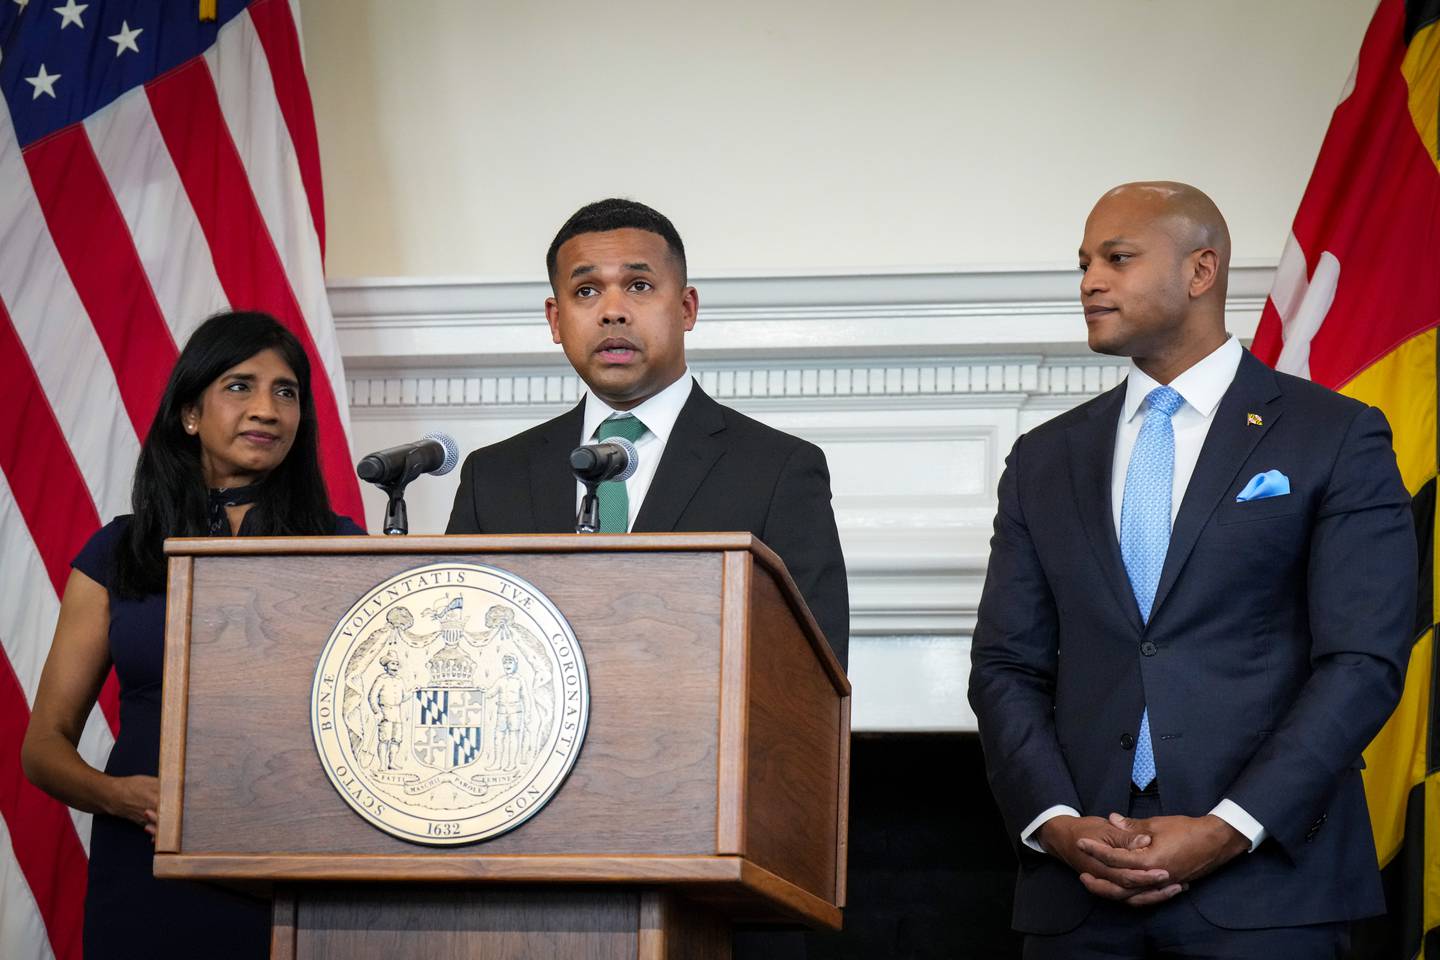 Paul Monteiro, center, speaks after being announced as Gov. Wes Moore’s pick to serve as the first secretary of the Department of Service and Civic Innovation at a press conference in the Maryland State House on Monday, April 3. Moore and Lt. Gov. Aruna Miller, left, stand behind Monteiro as he addresses the room. Moore issued an executive order creating the cabinet-level department on his first full day in office in January.